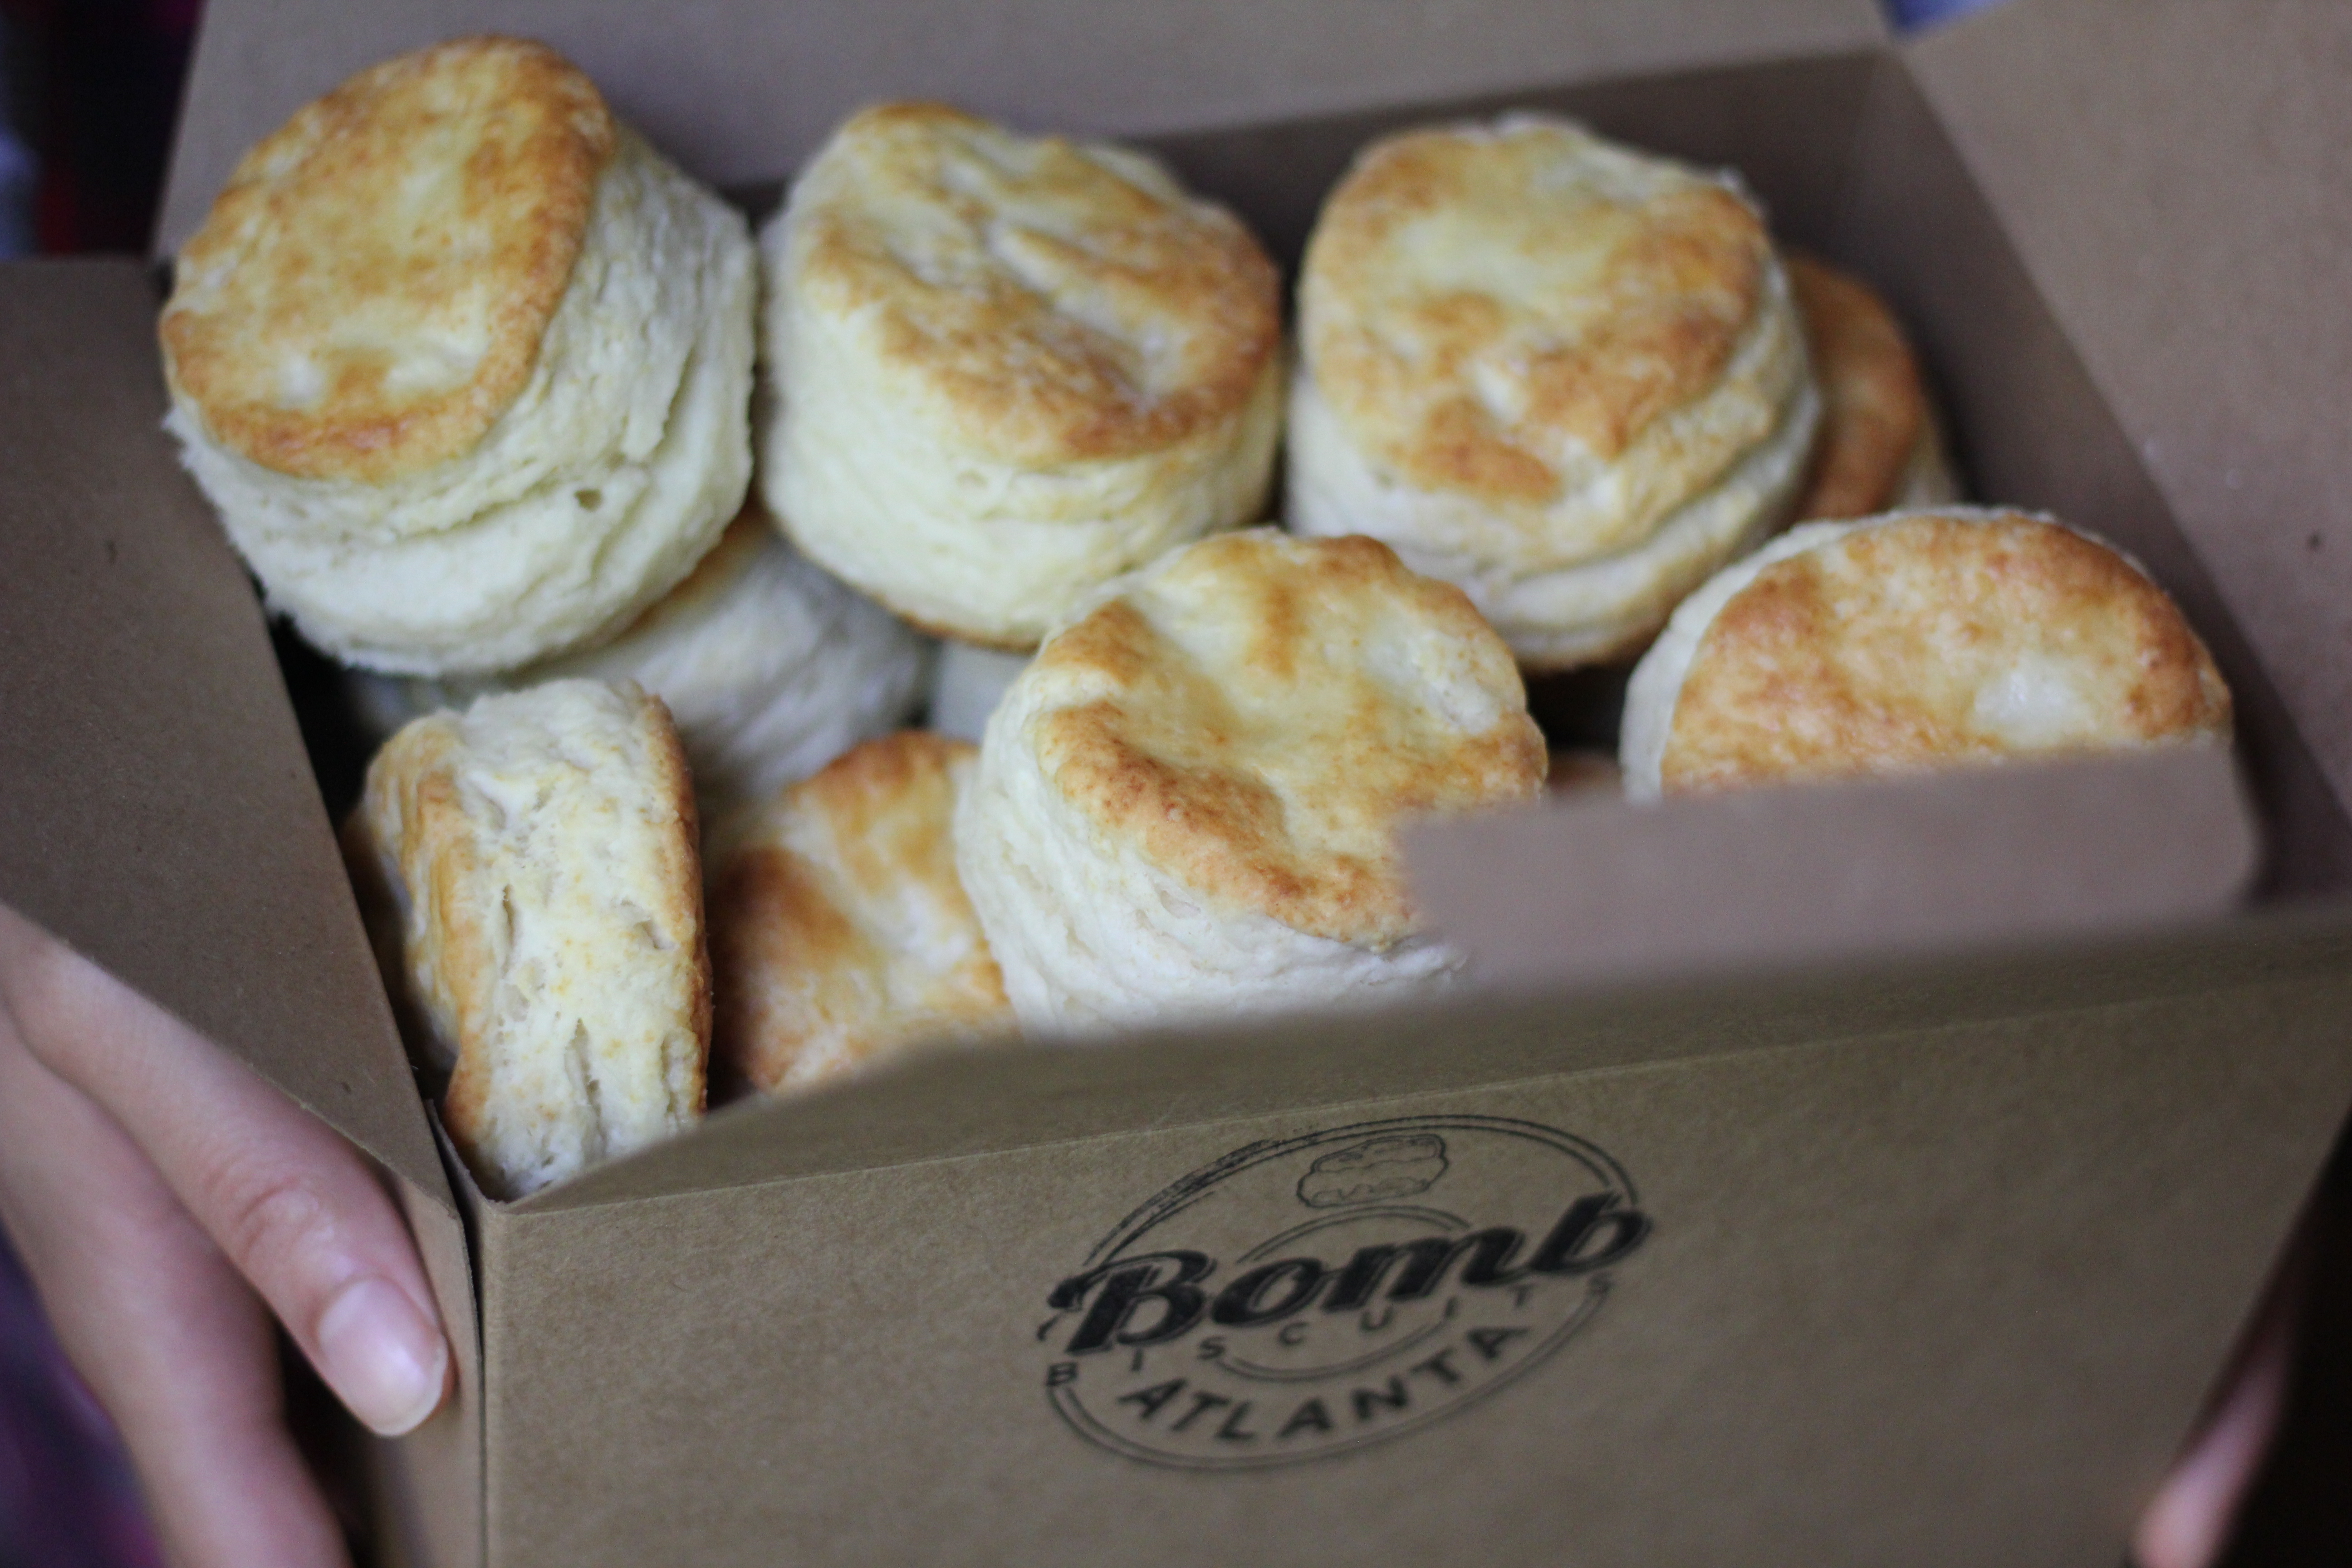 A takeout box of Bomb Biscuits baked by Erika Council in Atlanta